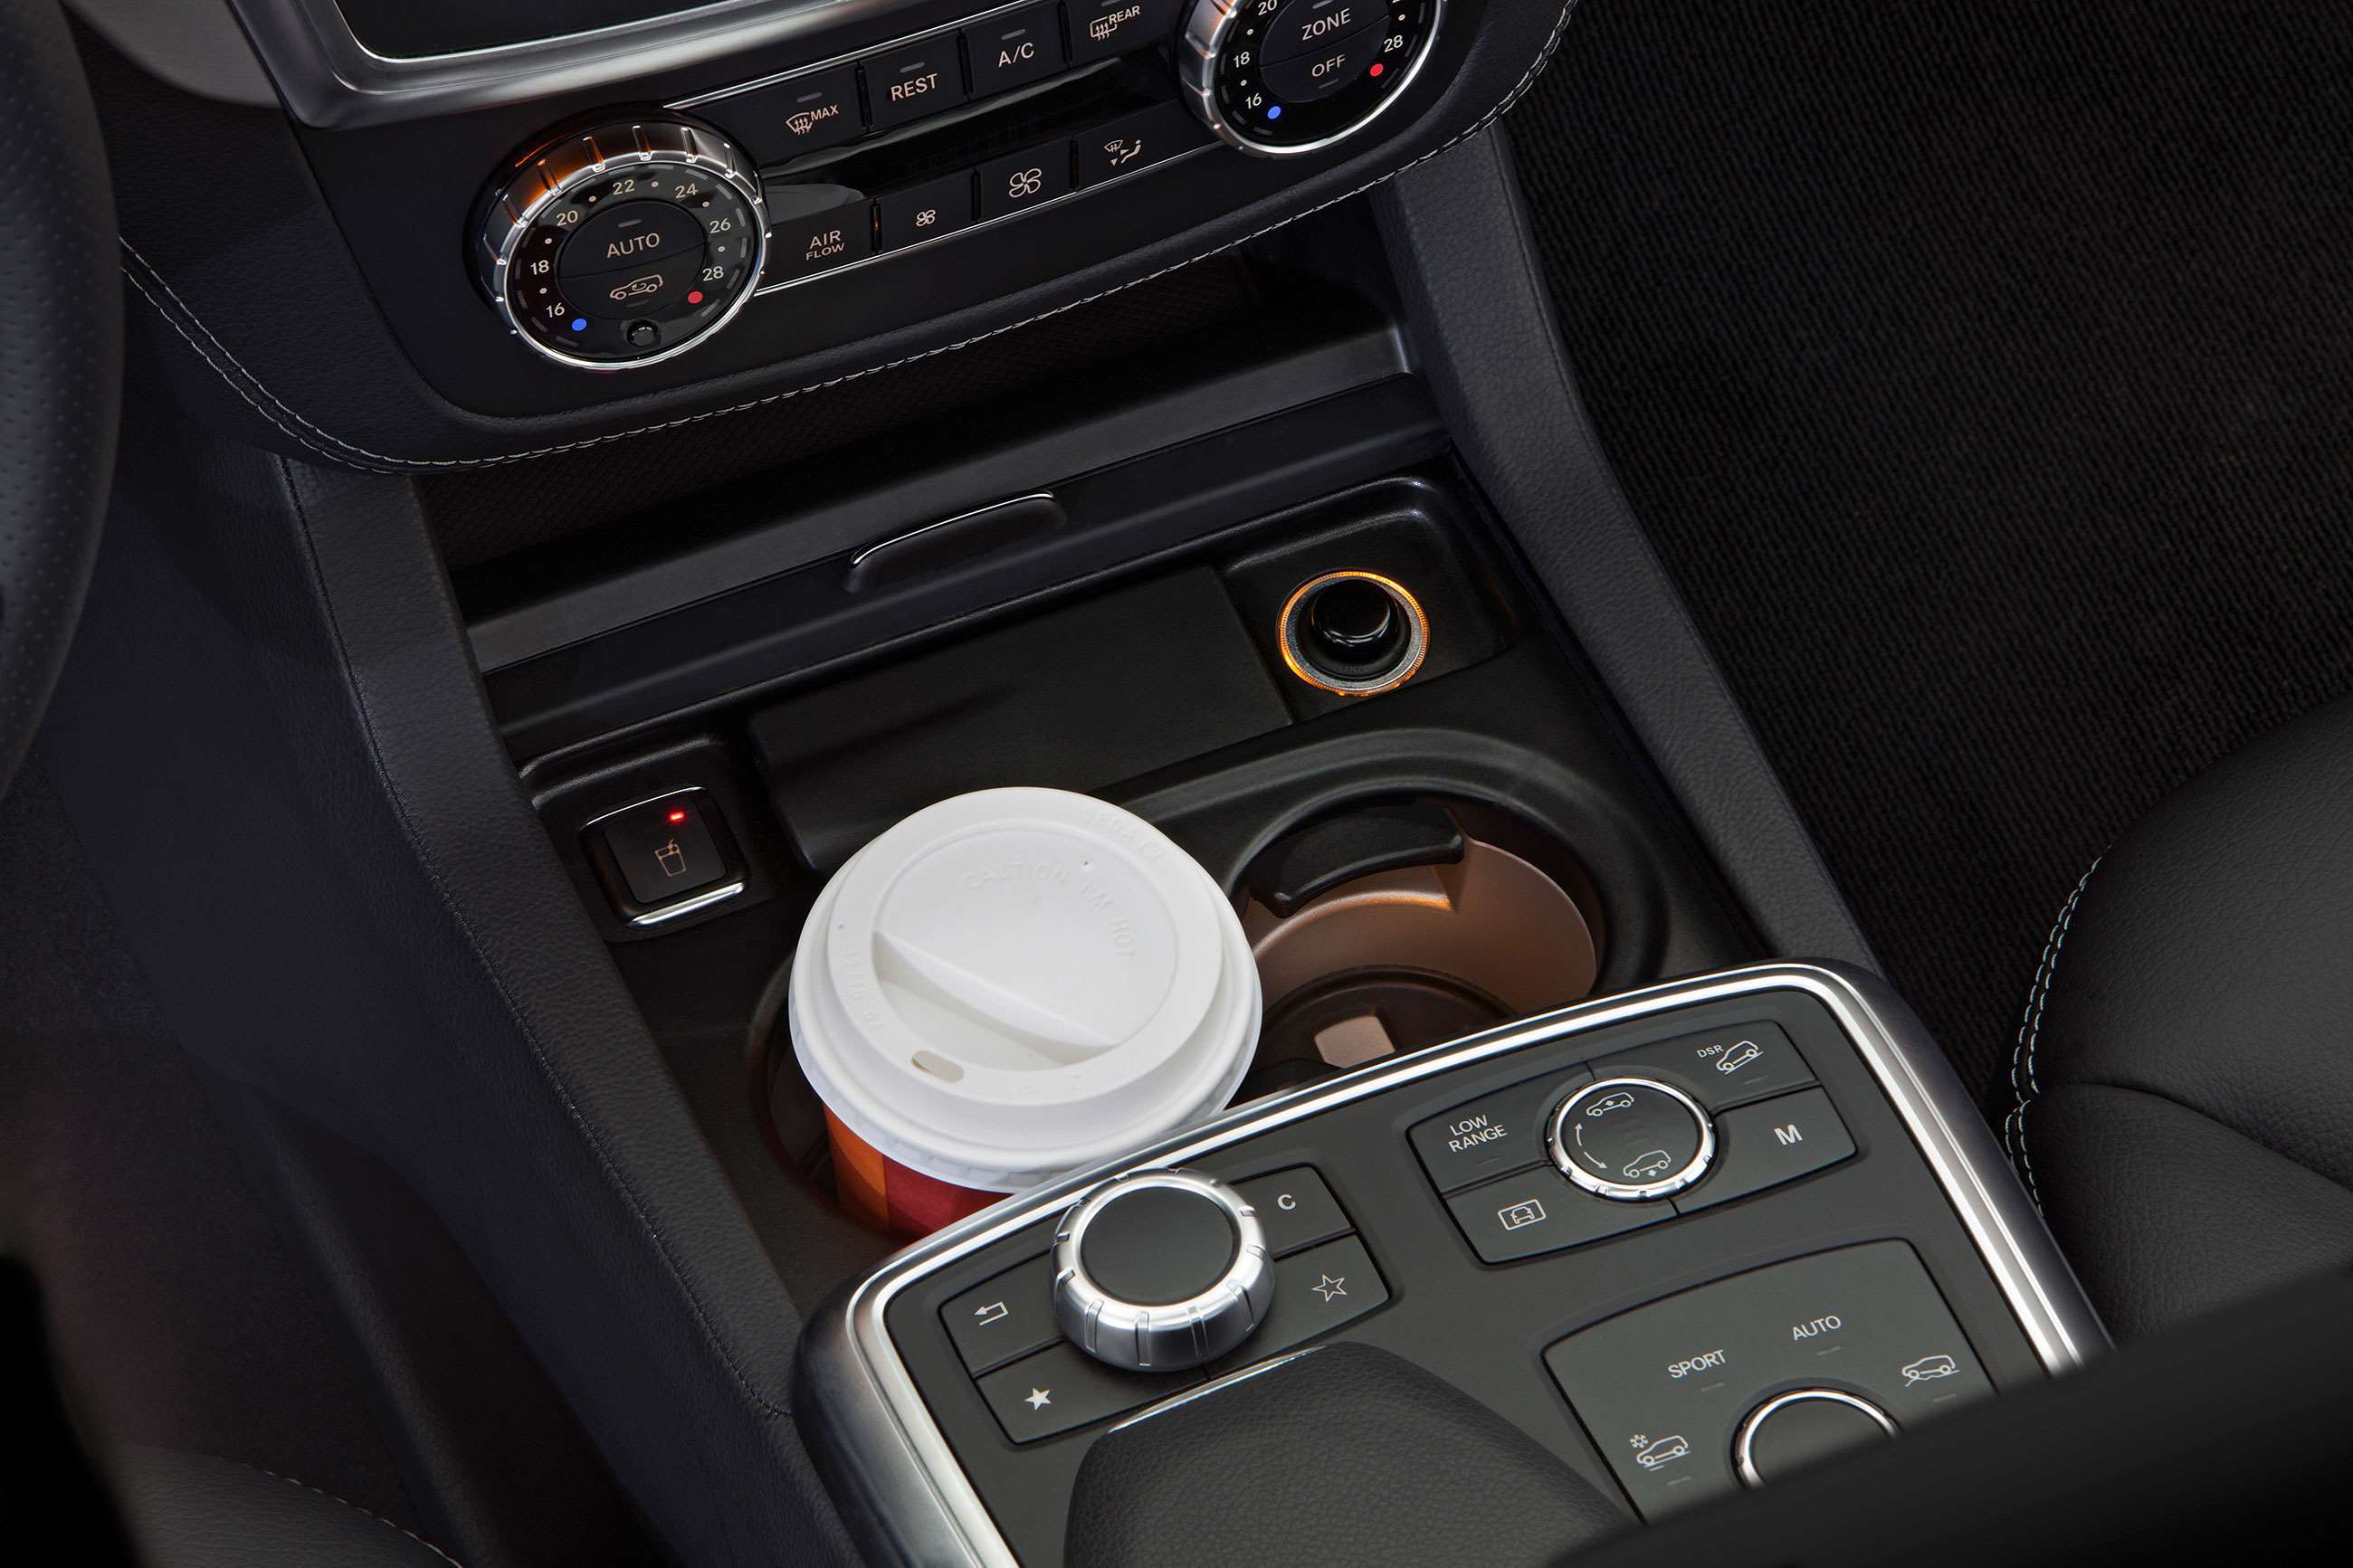 worst-car-features-8-small-cupholders-goodwood-23072021.jpg